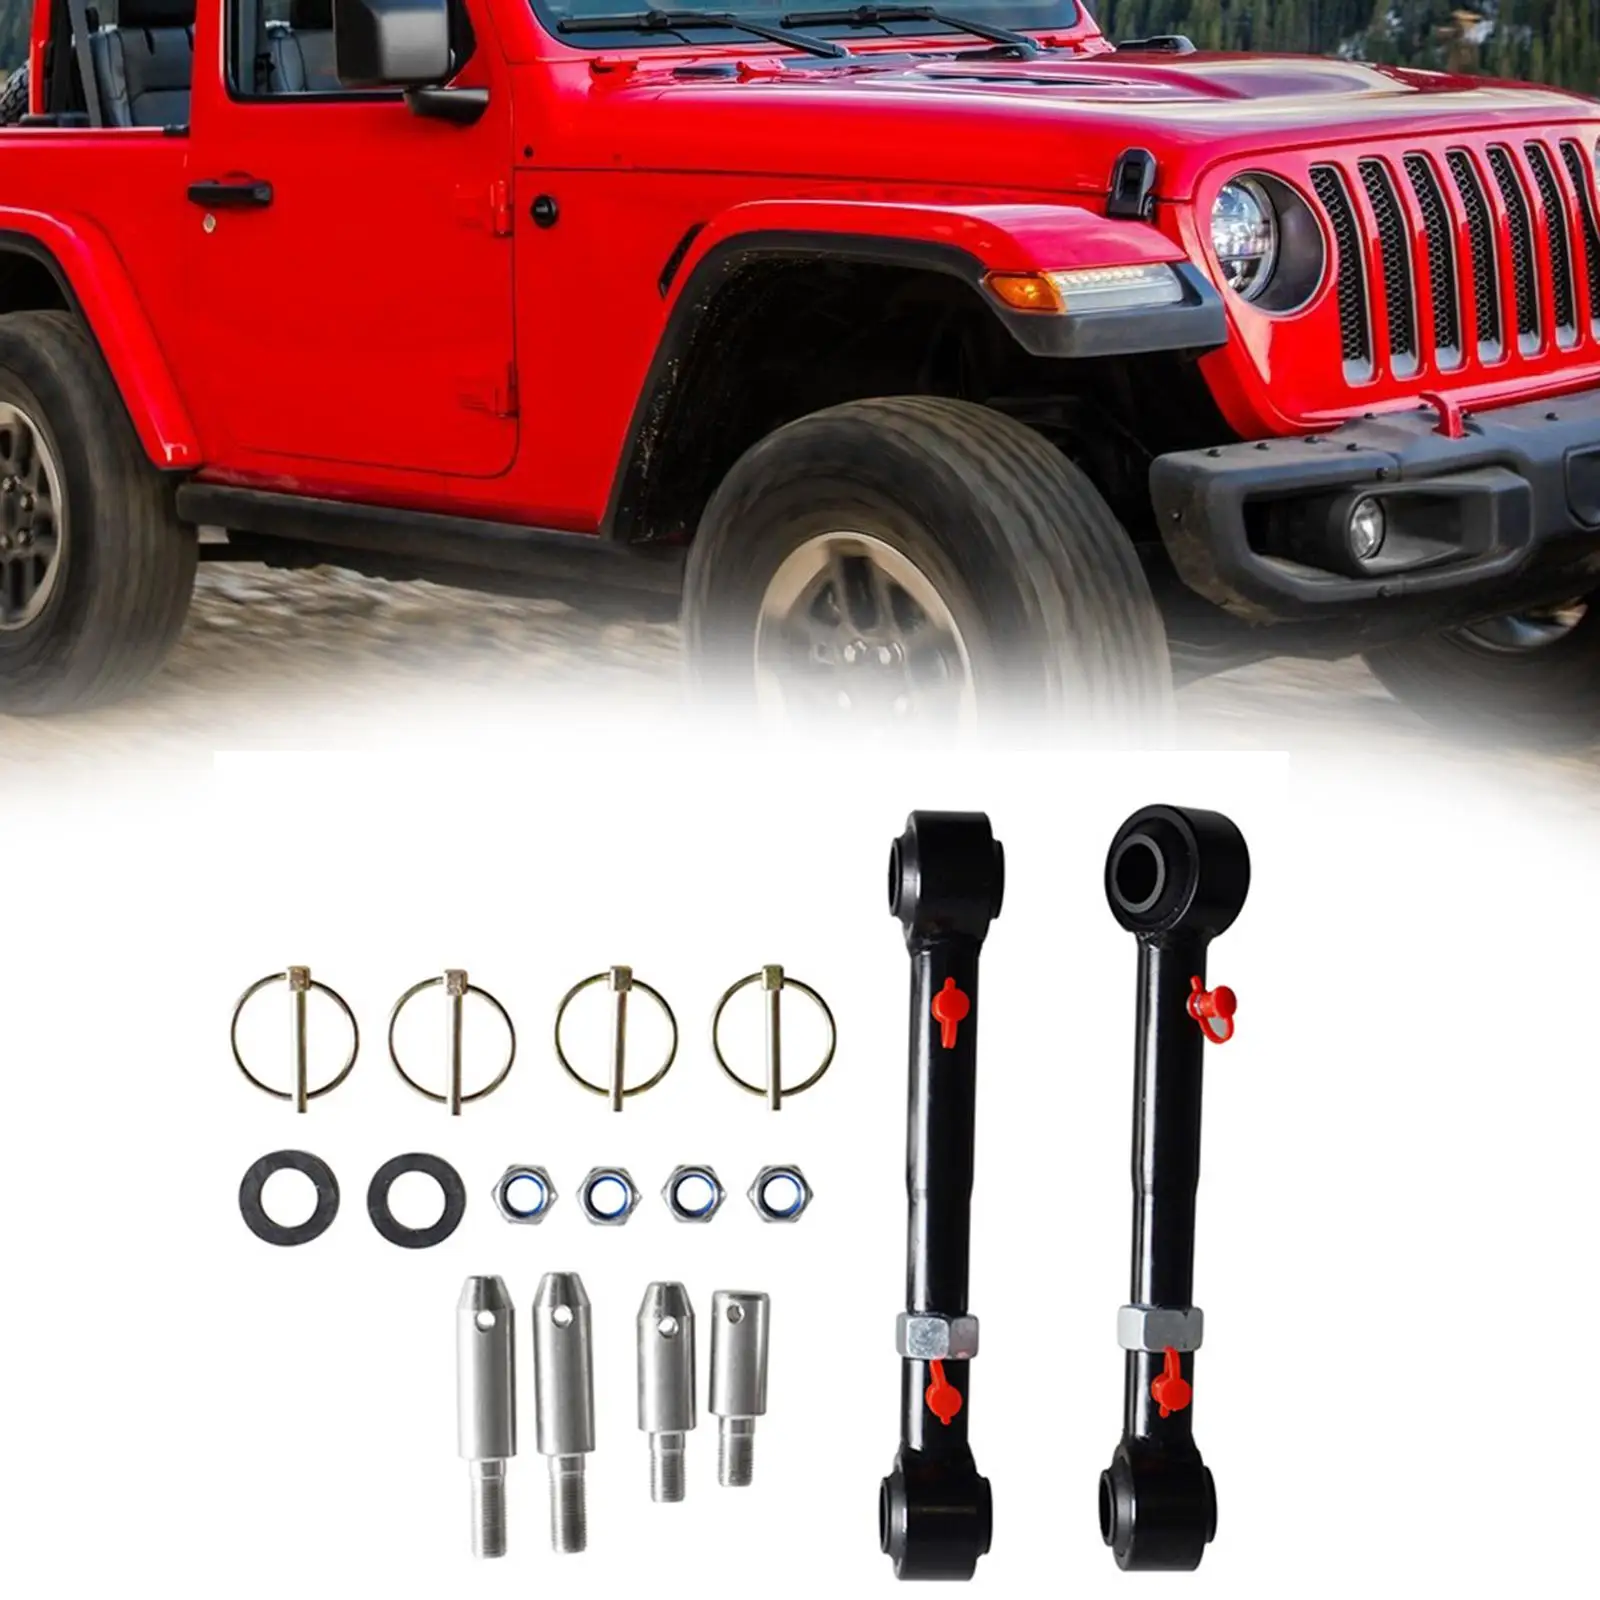 Adjustable Front Swaybar Professional Repair Parts Car Accessory Sway Bar Link Kit Front for Jeep Wrangler 2007-2018